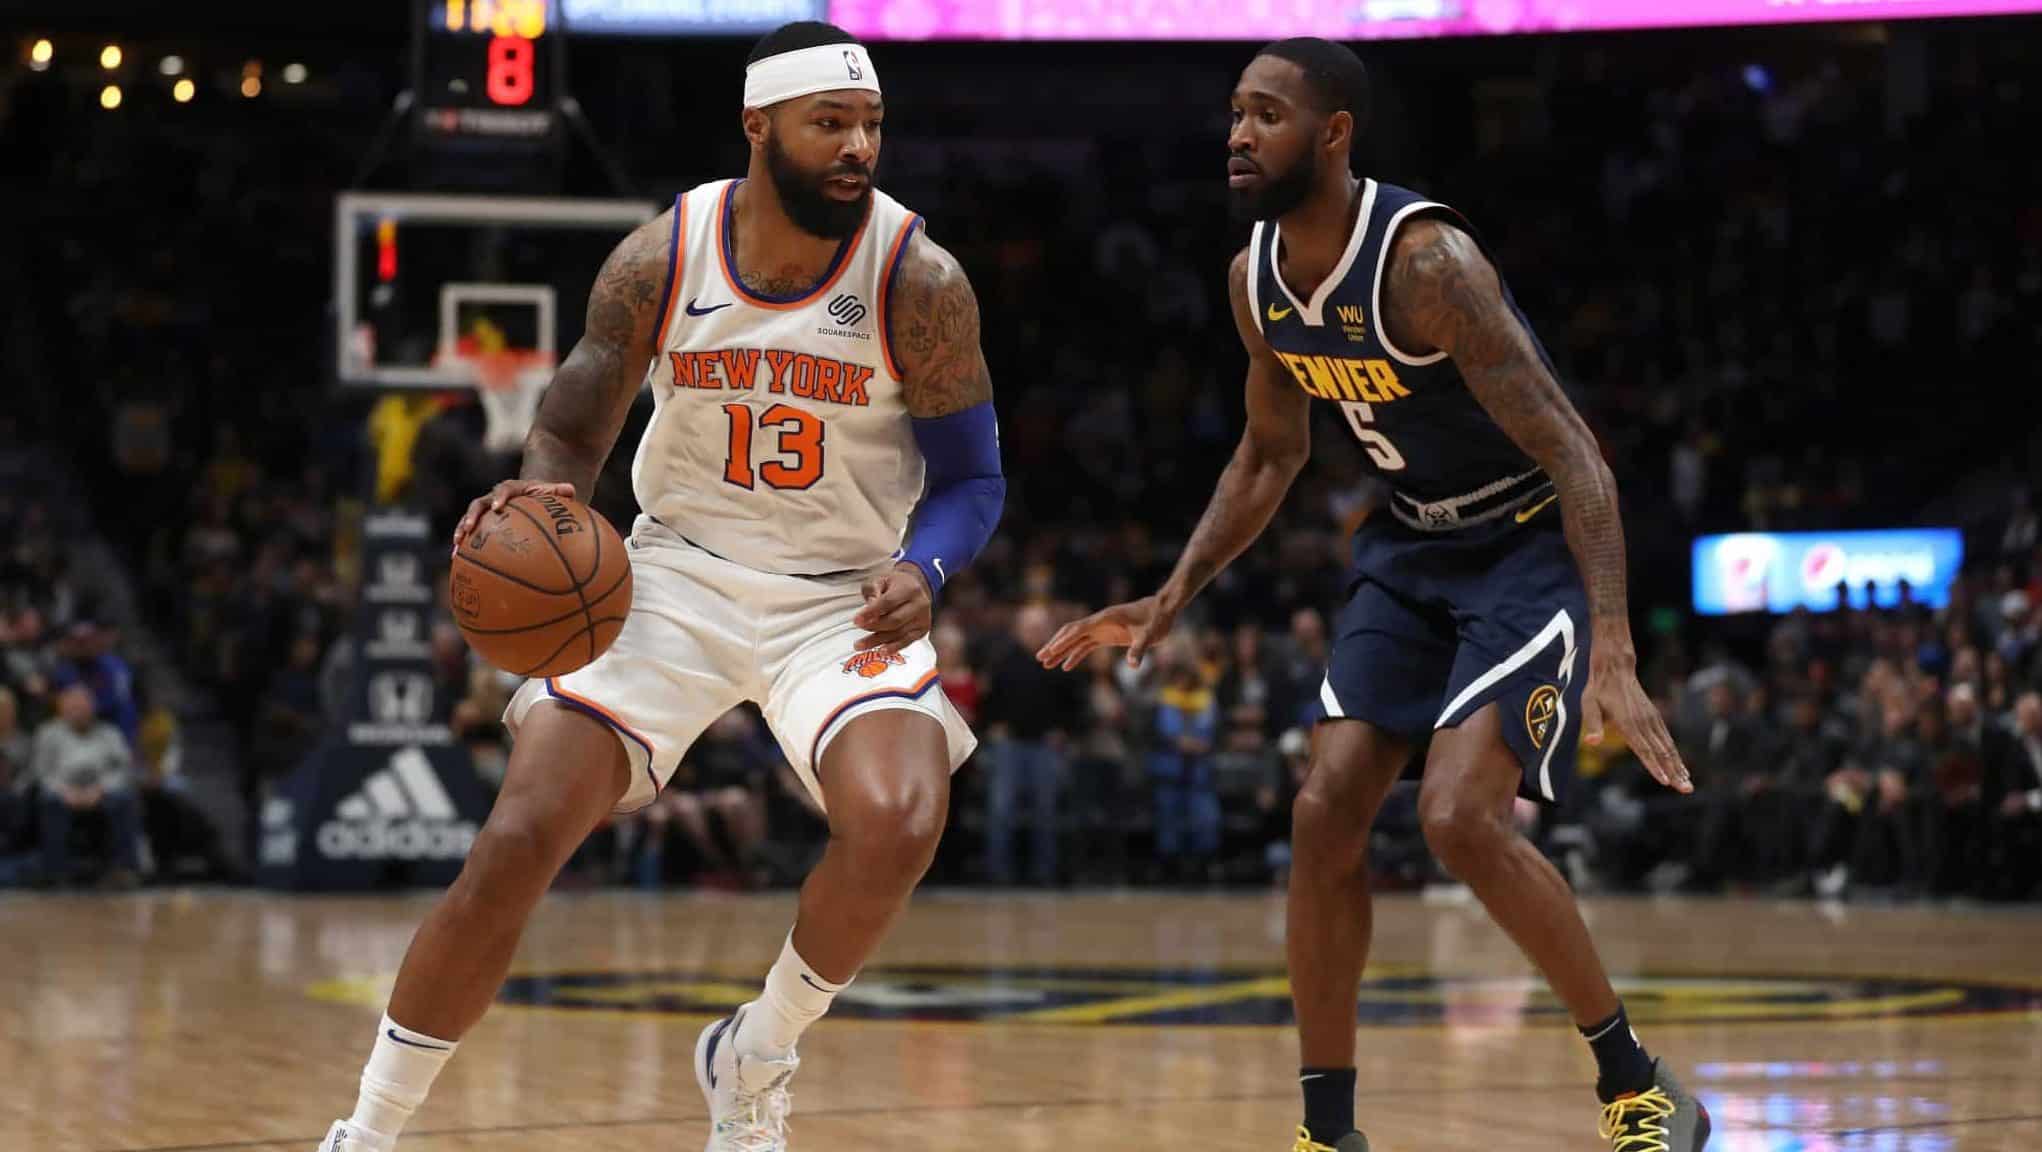 DENVER, COLORADO - DECEMBER 15: Marcus Morris Sr. #13 of the New York Knicks drives against Will Barton III #5 of the Denver Nuggets in the first quarter at the Pepsi Center on December 15, 2019 in Denver, Colorado. NOTE TO USER: User expressly acknowledges and agrees that, by downloading and or using this photograph, User is consenting to the terms and conditions of the Getty Images License Agreement.